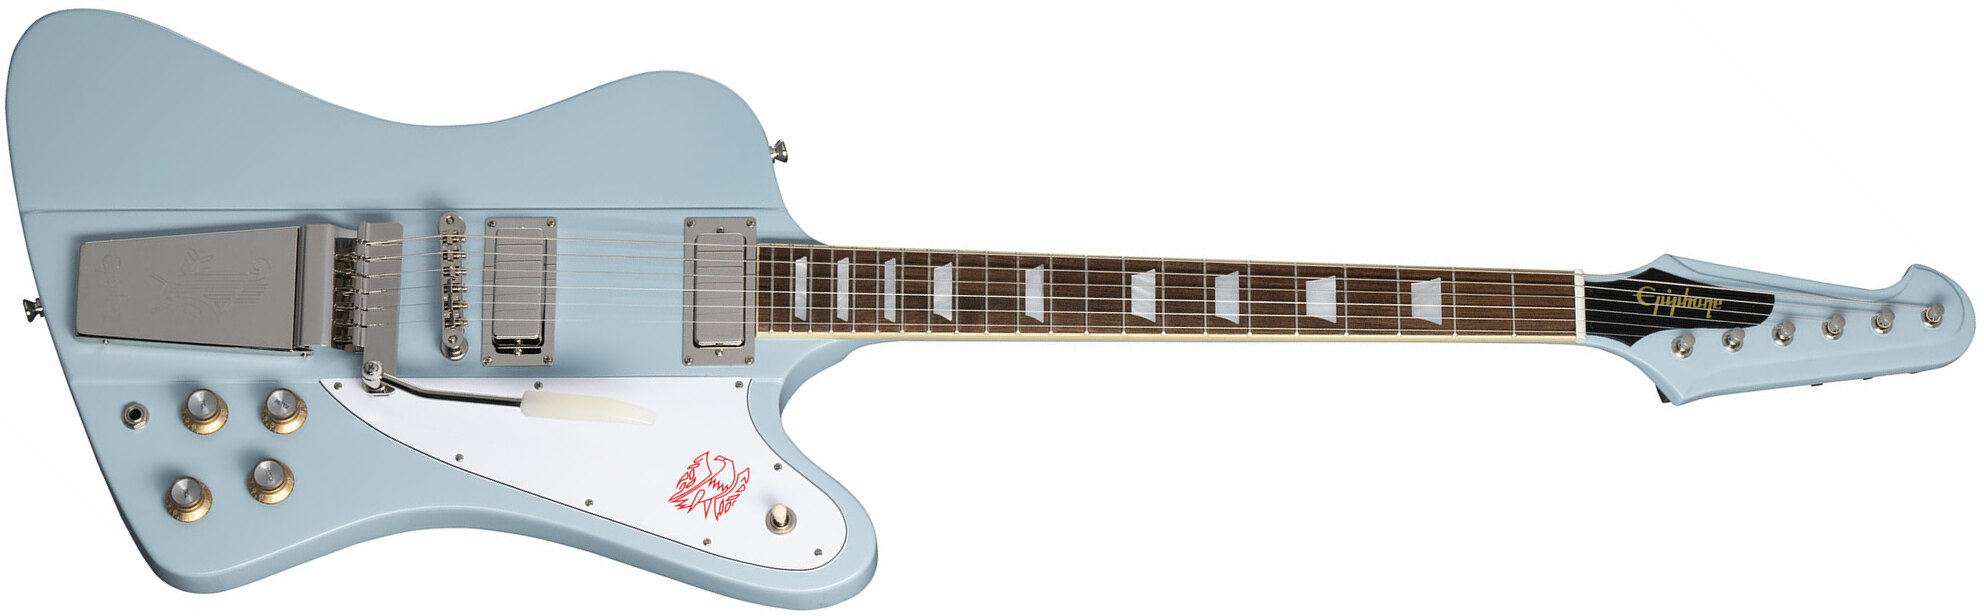 Epiphone Firebird V 1963 Maestro Vibrola Inspired By Gibson Custom 2mh Trem Lau - Frost Blue - Guitare Électrique RÉtro Rock - Main picture